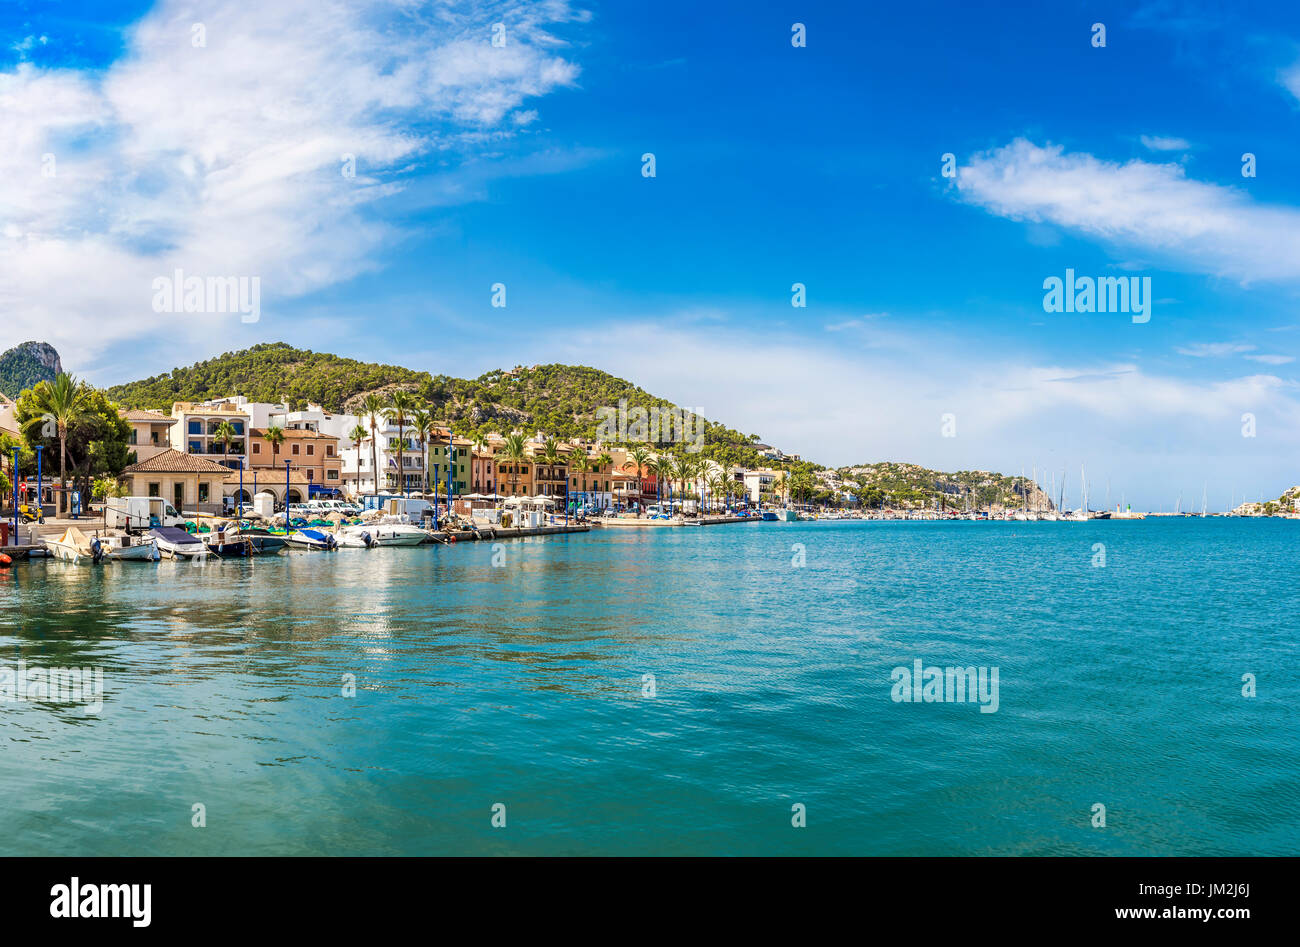 Panoramic view of the harbour in Puerto Andratx (Port d'Andratx), Mallorca, Balearic Islands, Spain, Europe Stock Photo